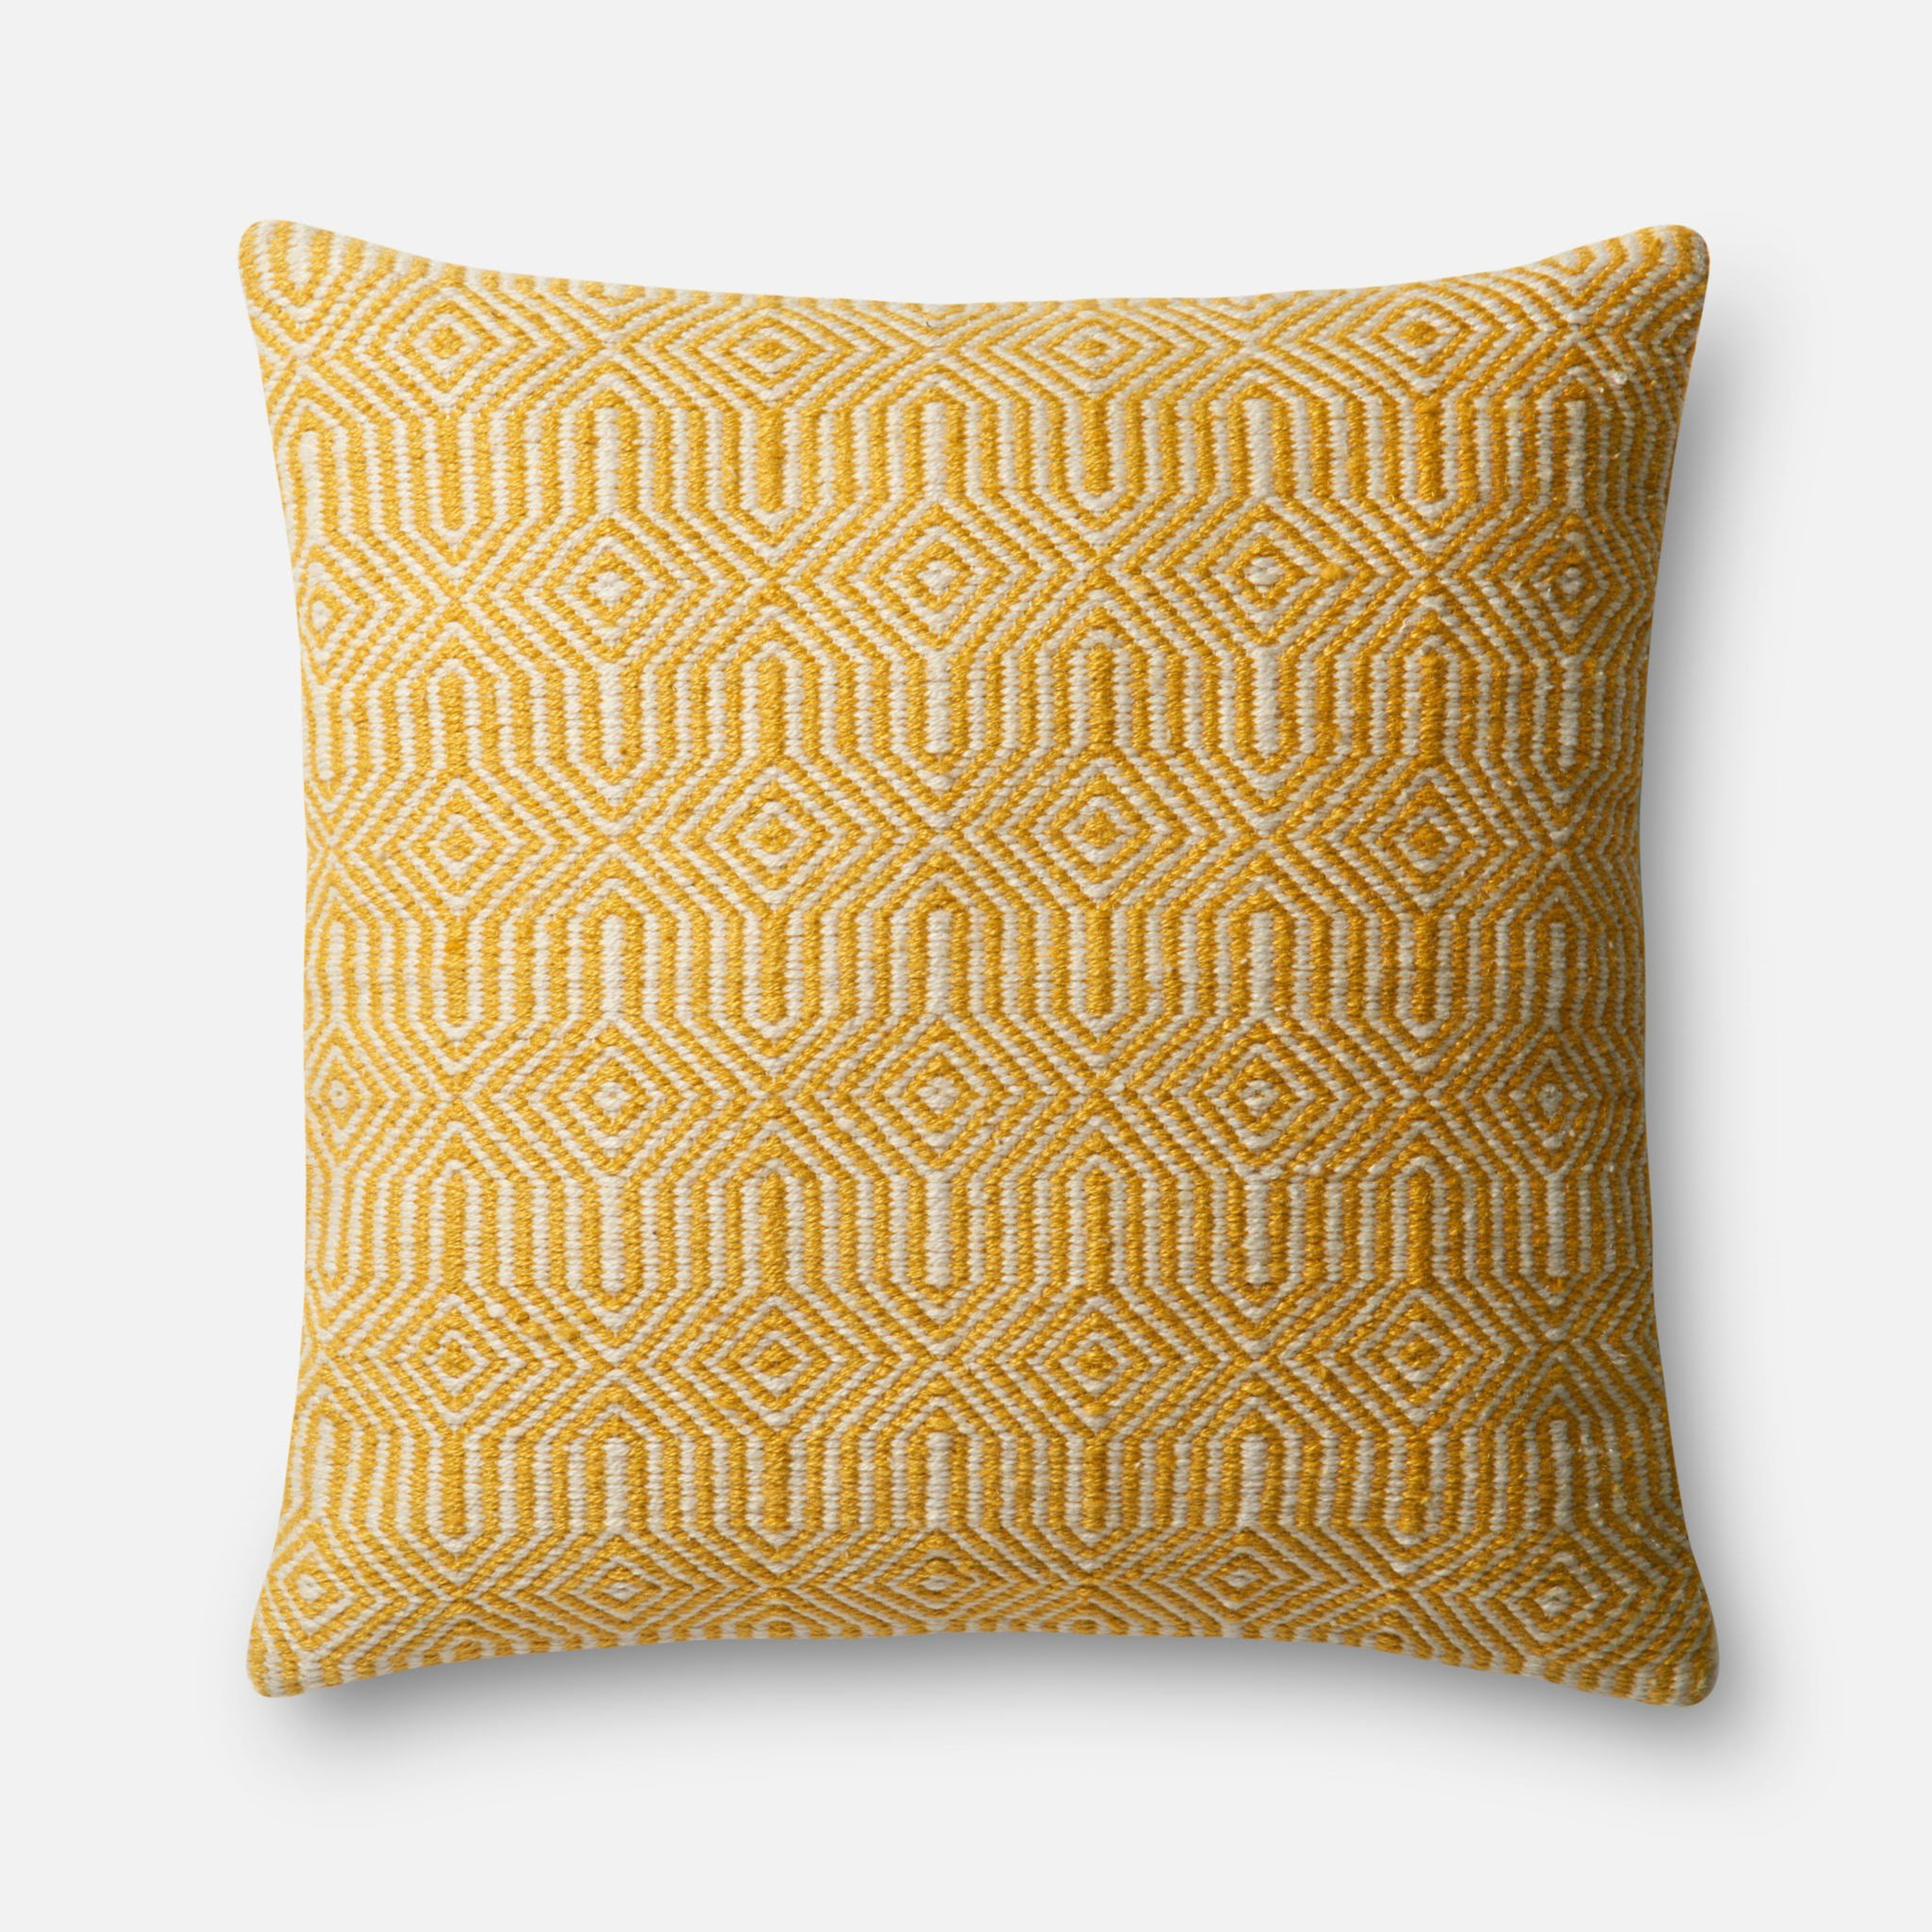 Indoor/Outdoor Throw Pillow with Down Fill, Yellow & Ivory, 22" x 22" - Loloi Rugs